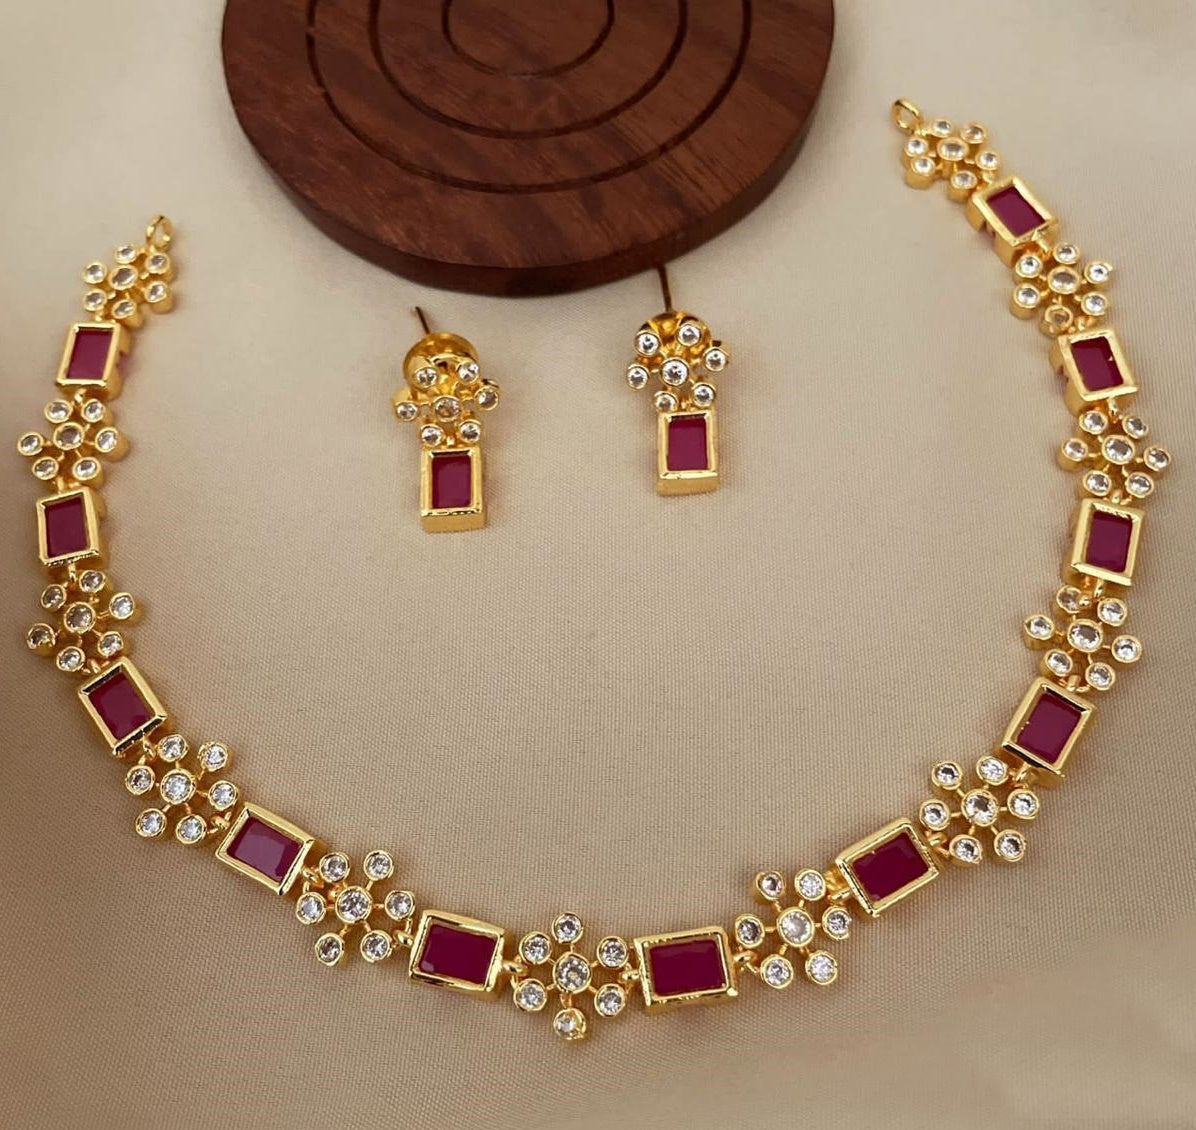 Premium Quality Micro Gold finish Diamond Like Design Necklace set with High Quality AD Stones 9523N